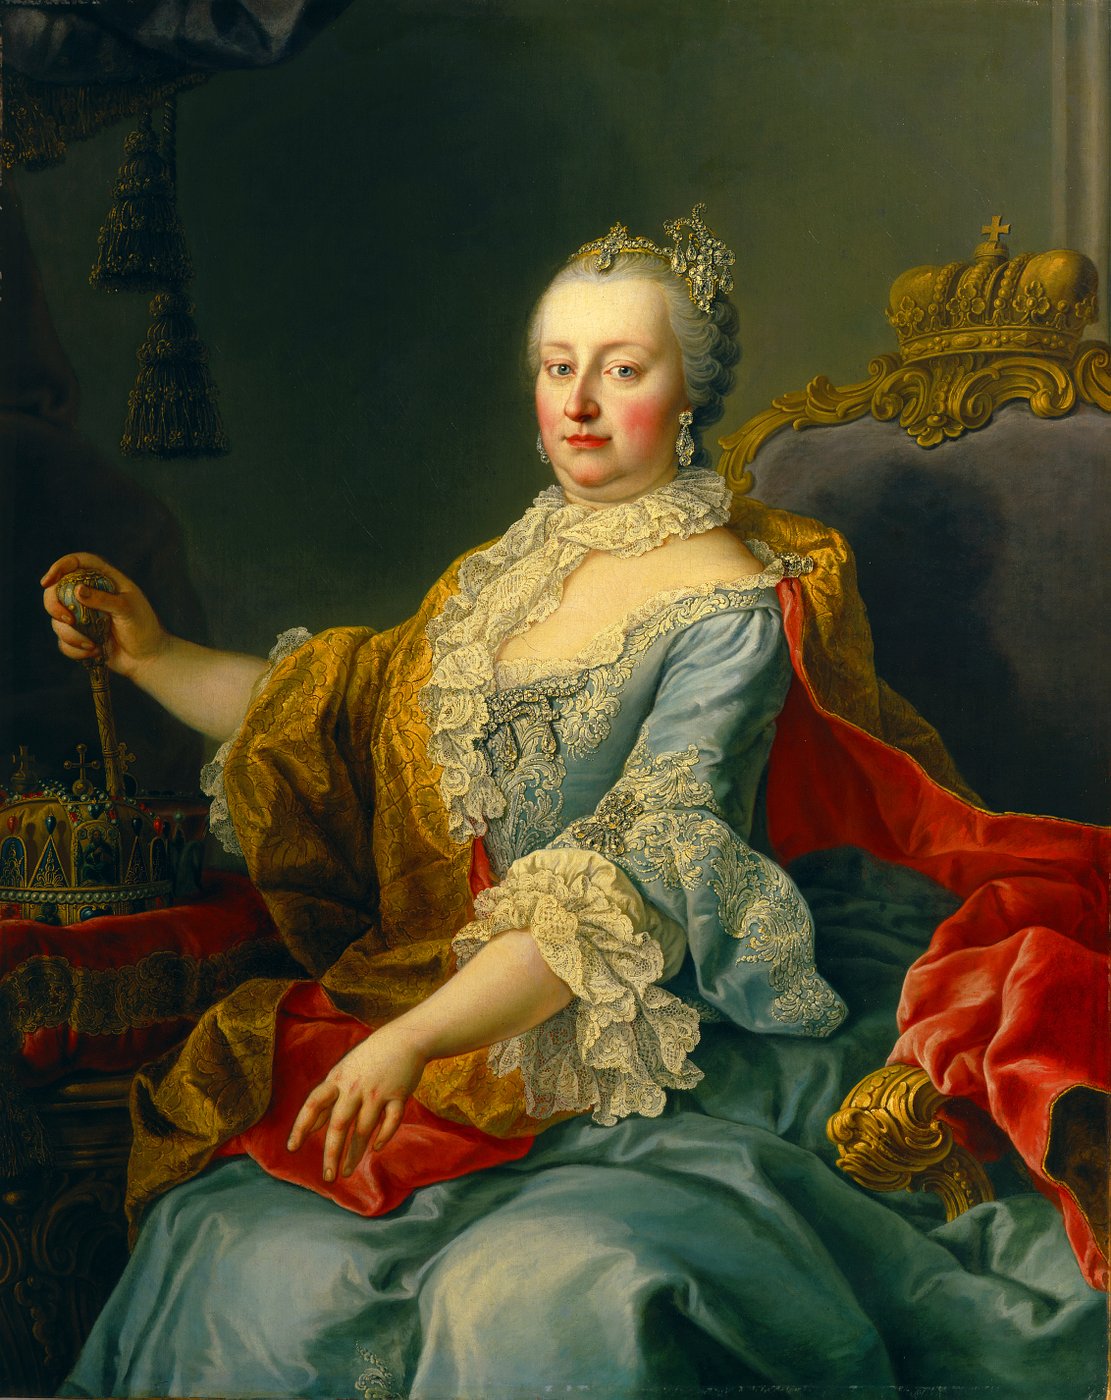 A historical painting of an empress dressed in light blue baroque clothes with a golden cape sitting on a padded chair. She wears a tiara on her head. To her right is the gilded imperial crown on a padded pedestal and in her right hand she holds a staff with a round handle. Her gaze falls directly on the viewer